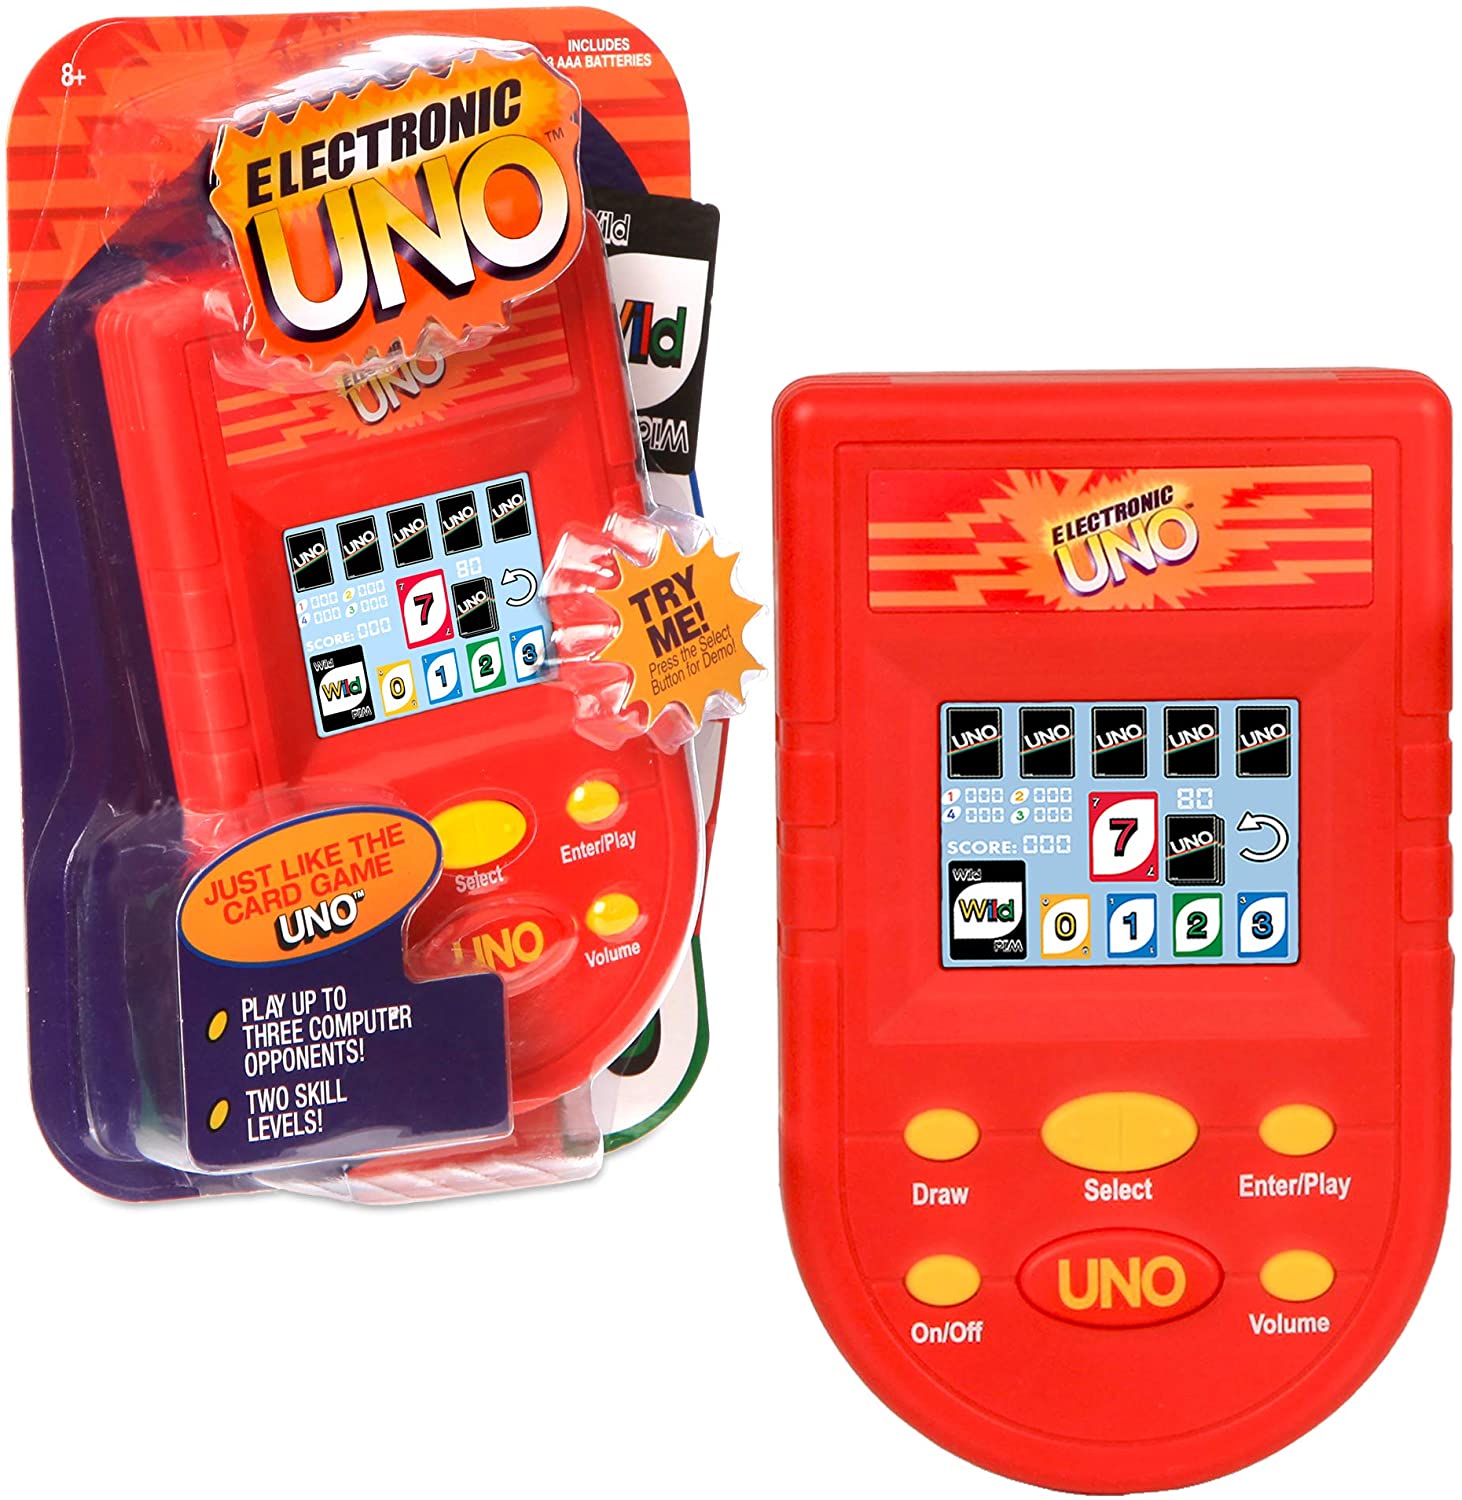 UNO Electronic Handheld Game with Full Color Screen for $3.20